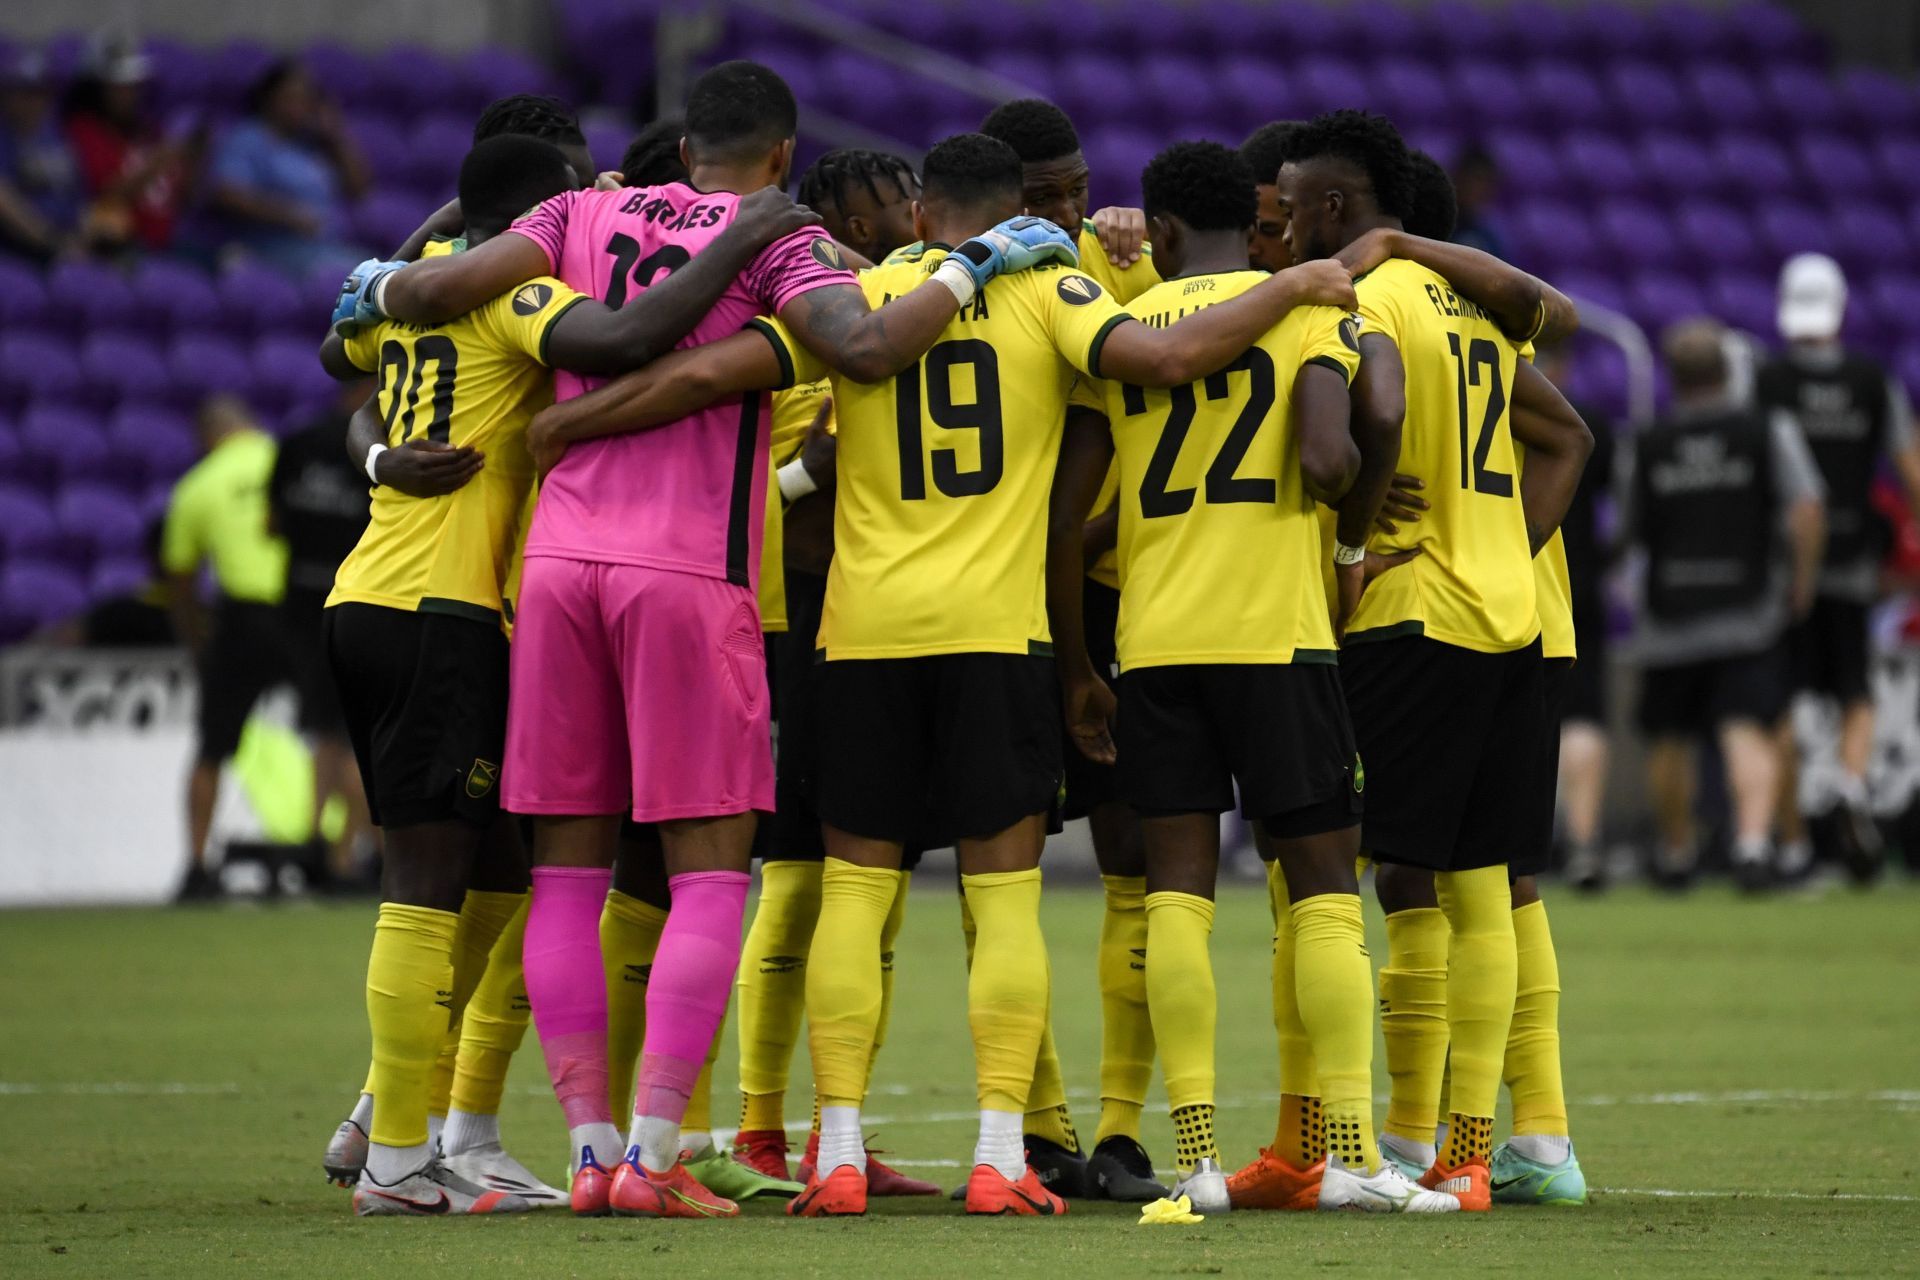 Jamaica host Costa Rica in their upcoming FIFA World Cup qualifying fixture on Wednesday